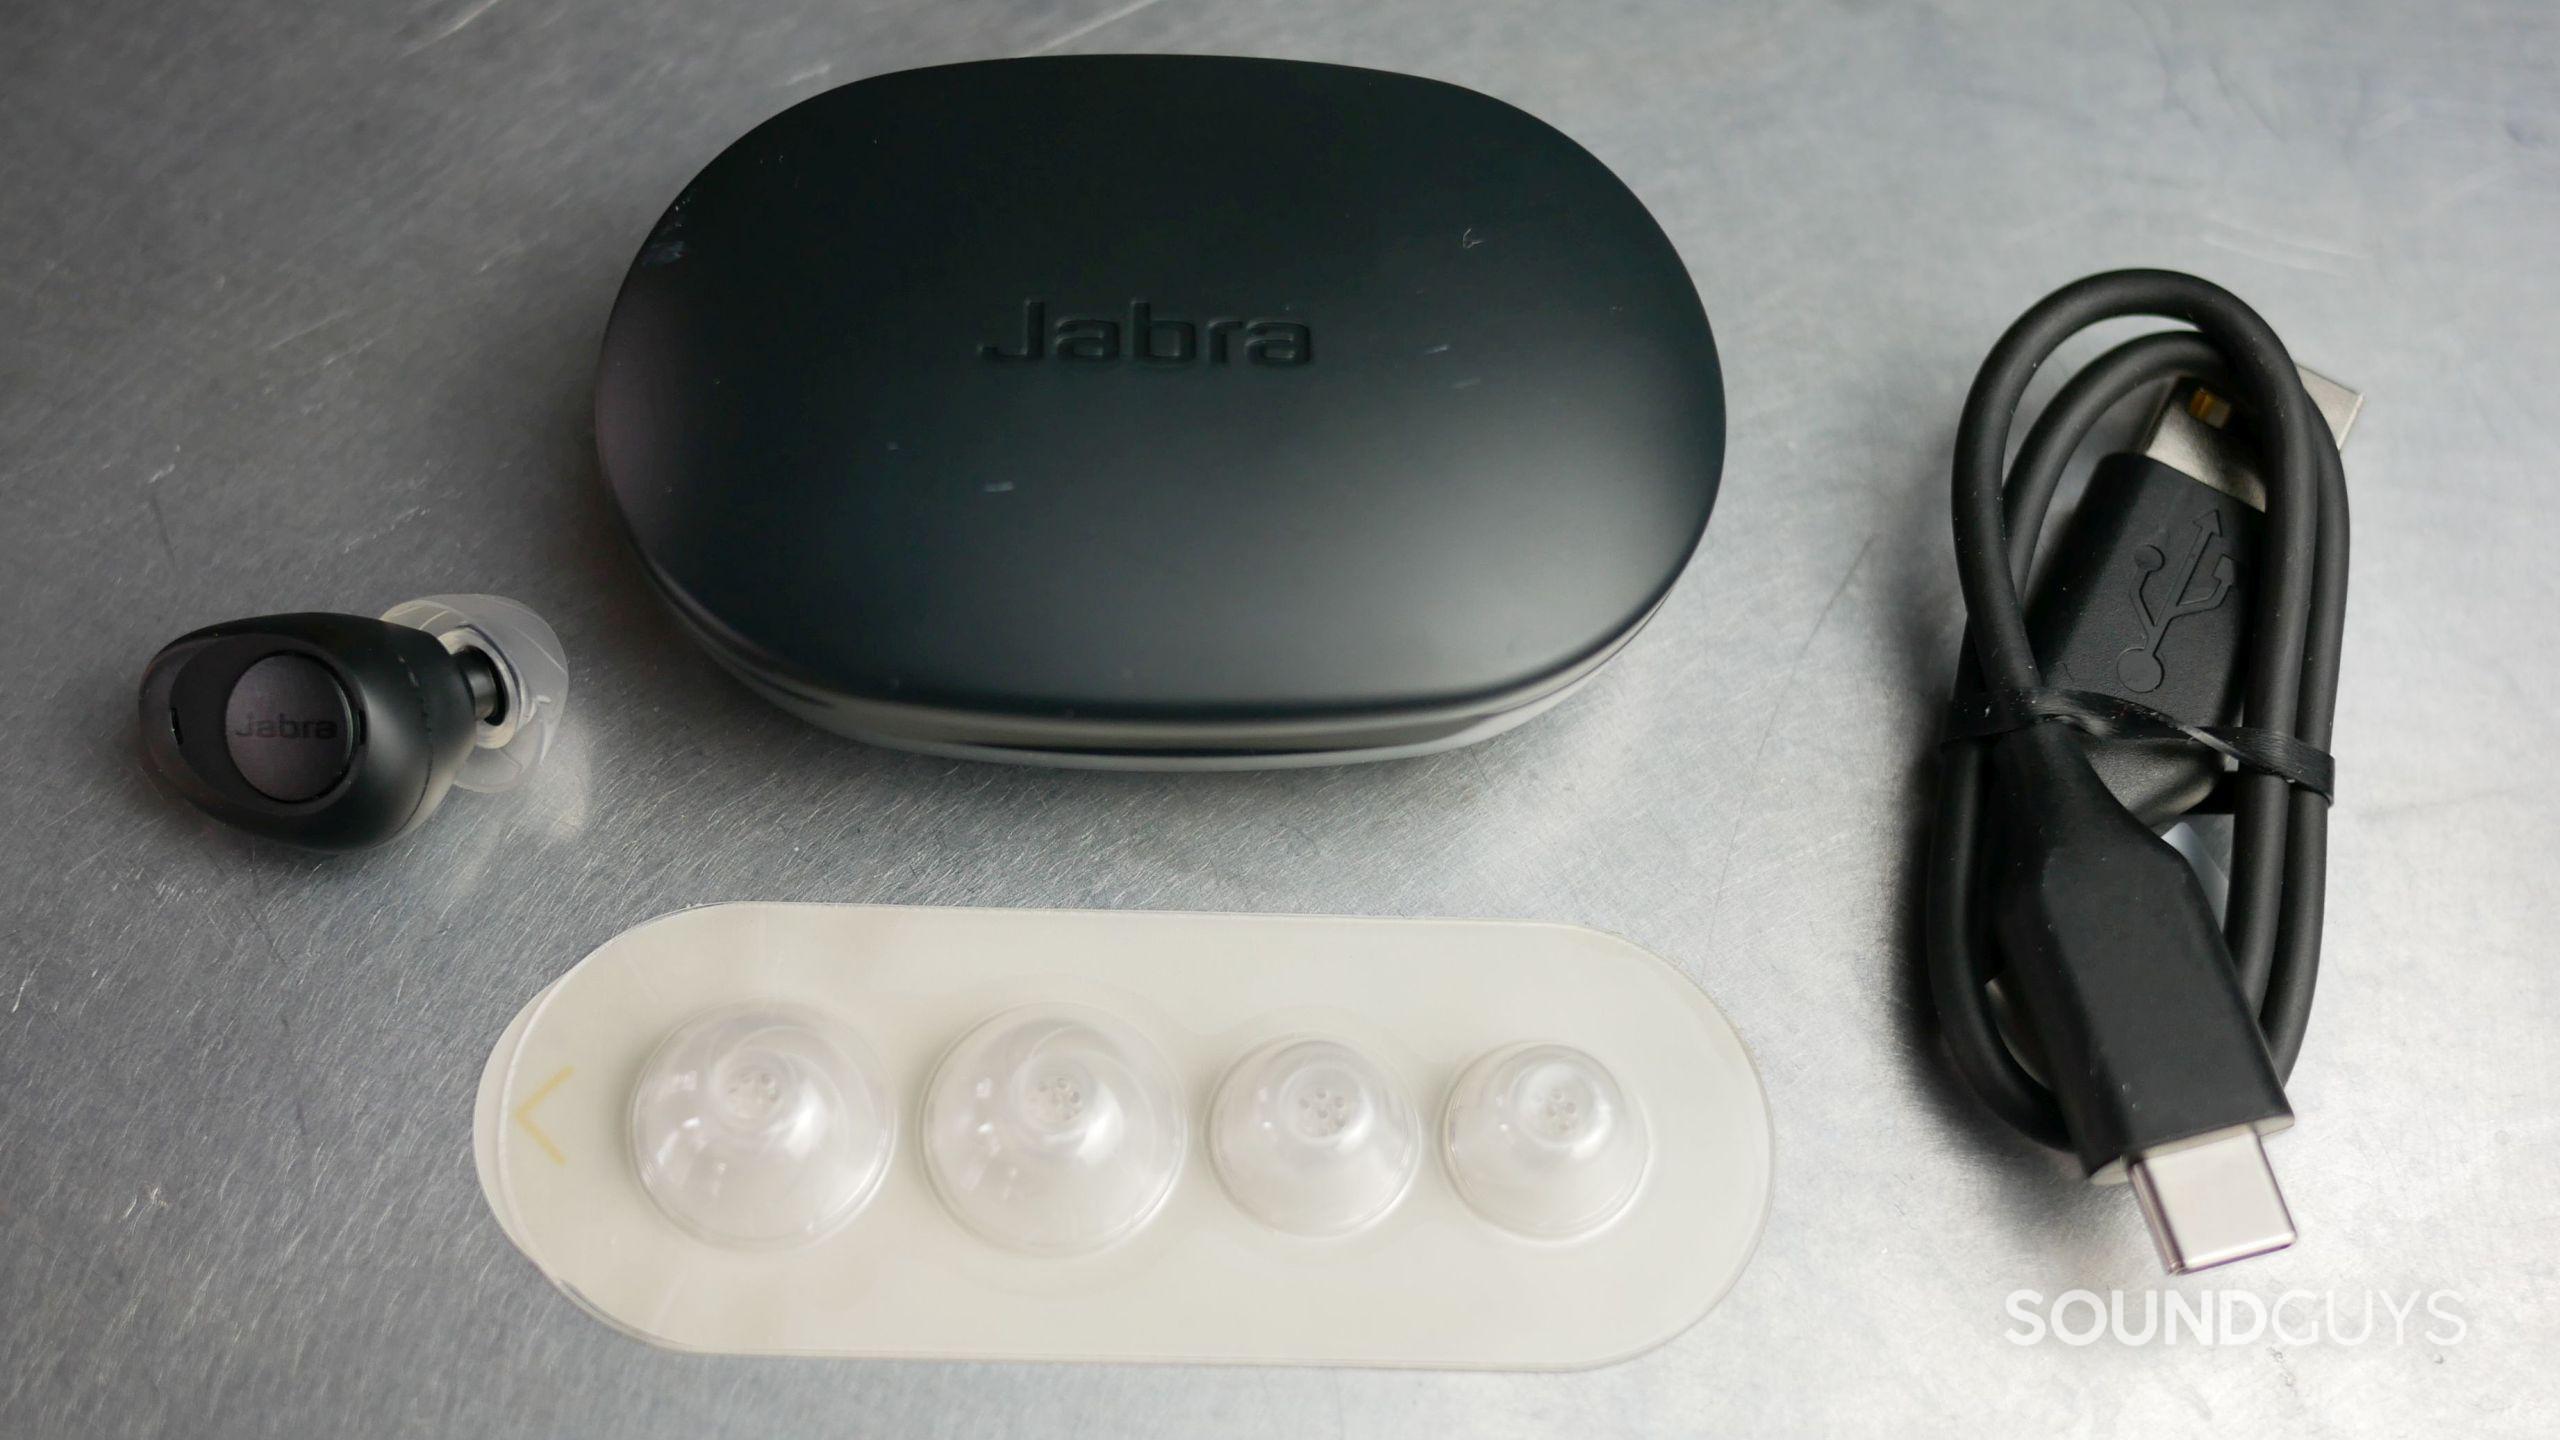 Jabra Enhance Plus accessories, including silicone ear tips, charging case, and charging cable.